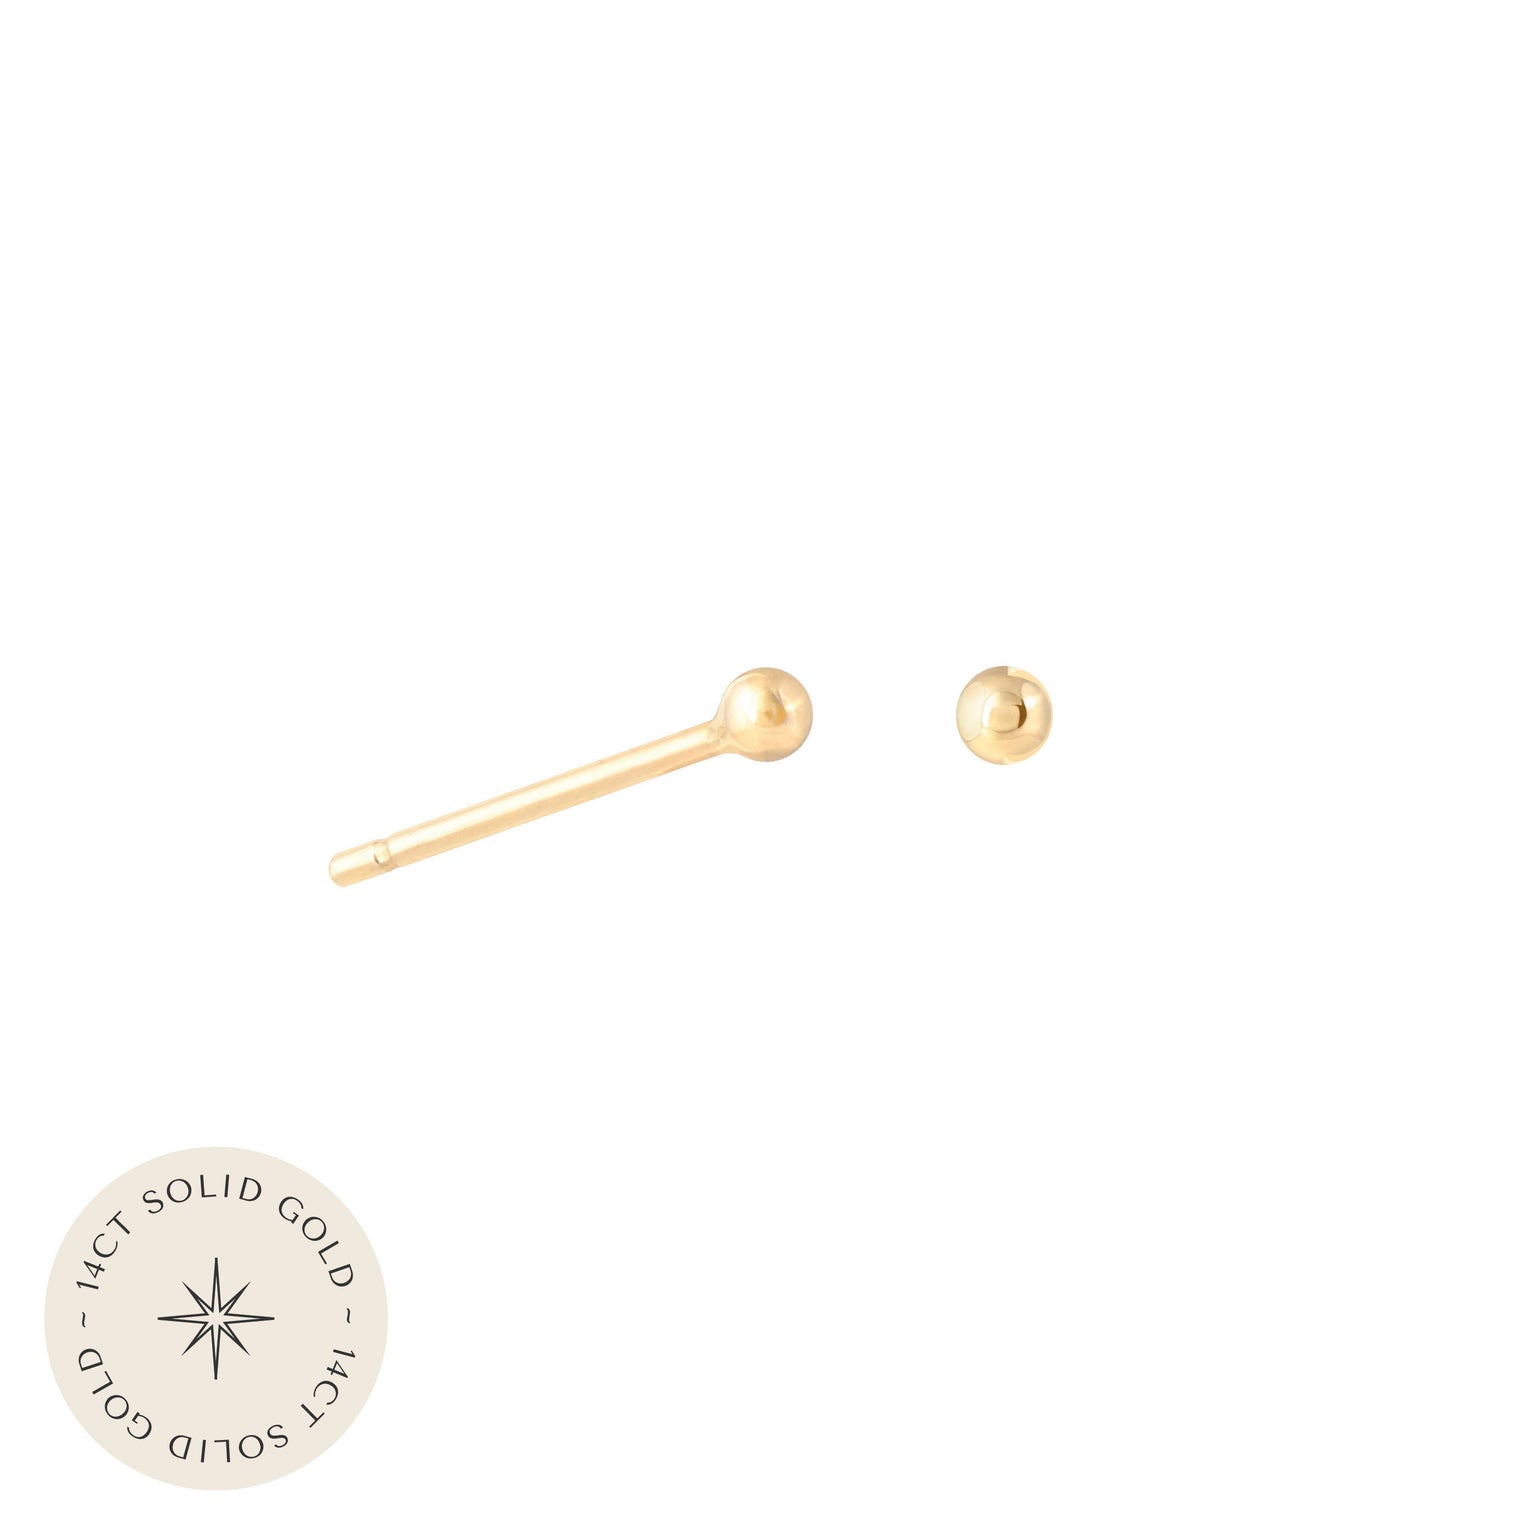 Small Ball Stud Earrings in Solid Gold with 14CT solid gold label